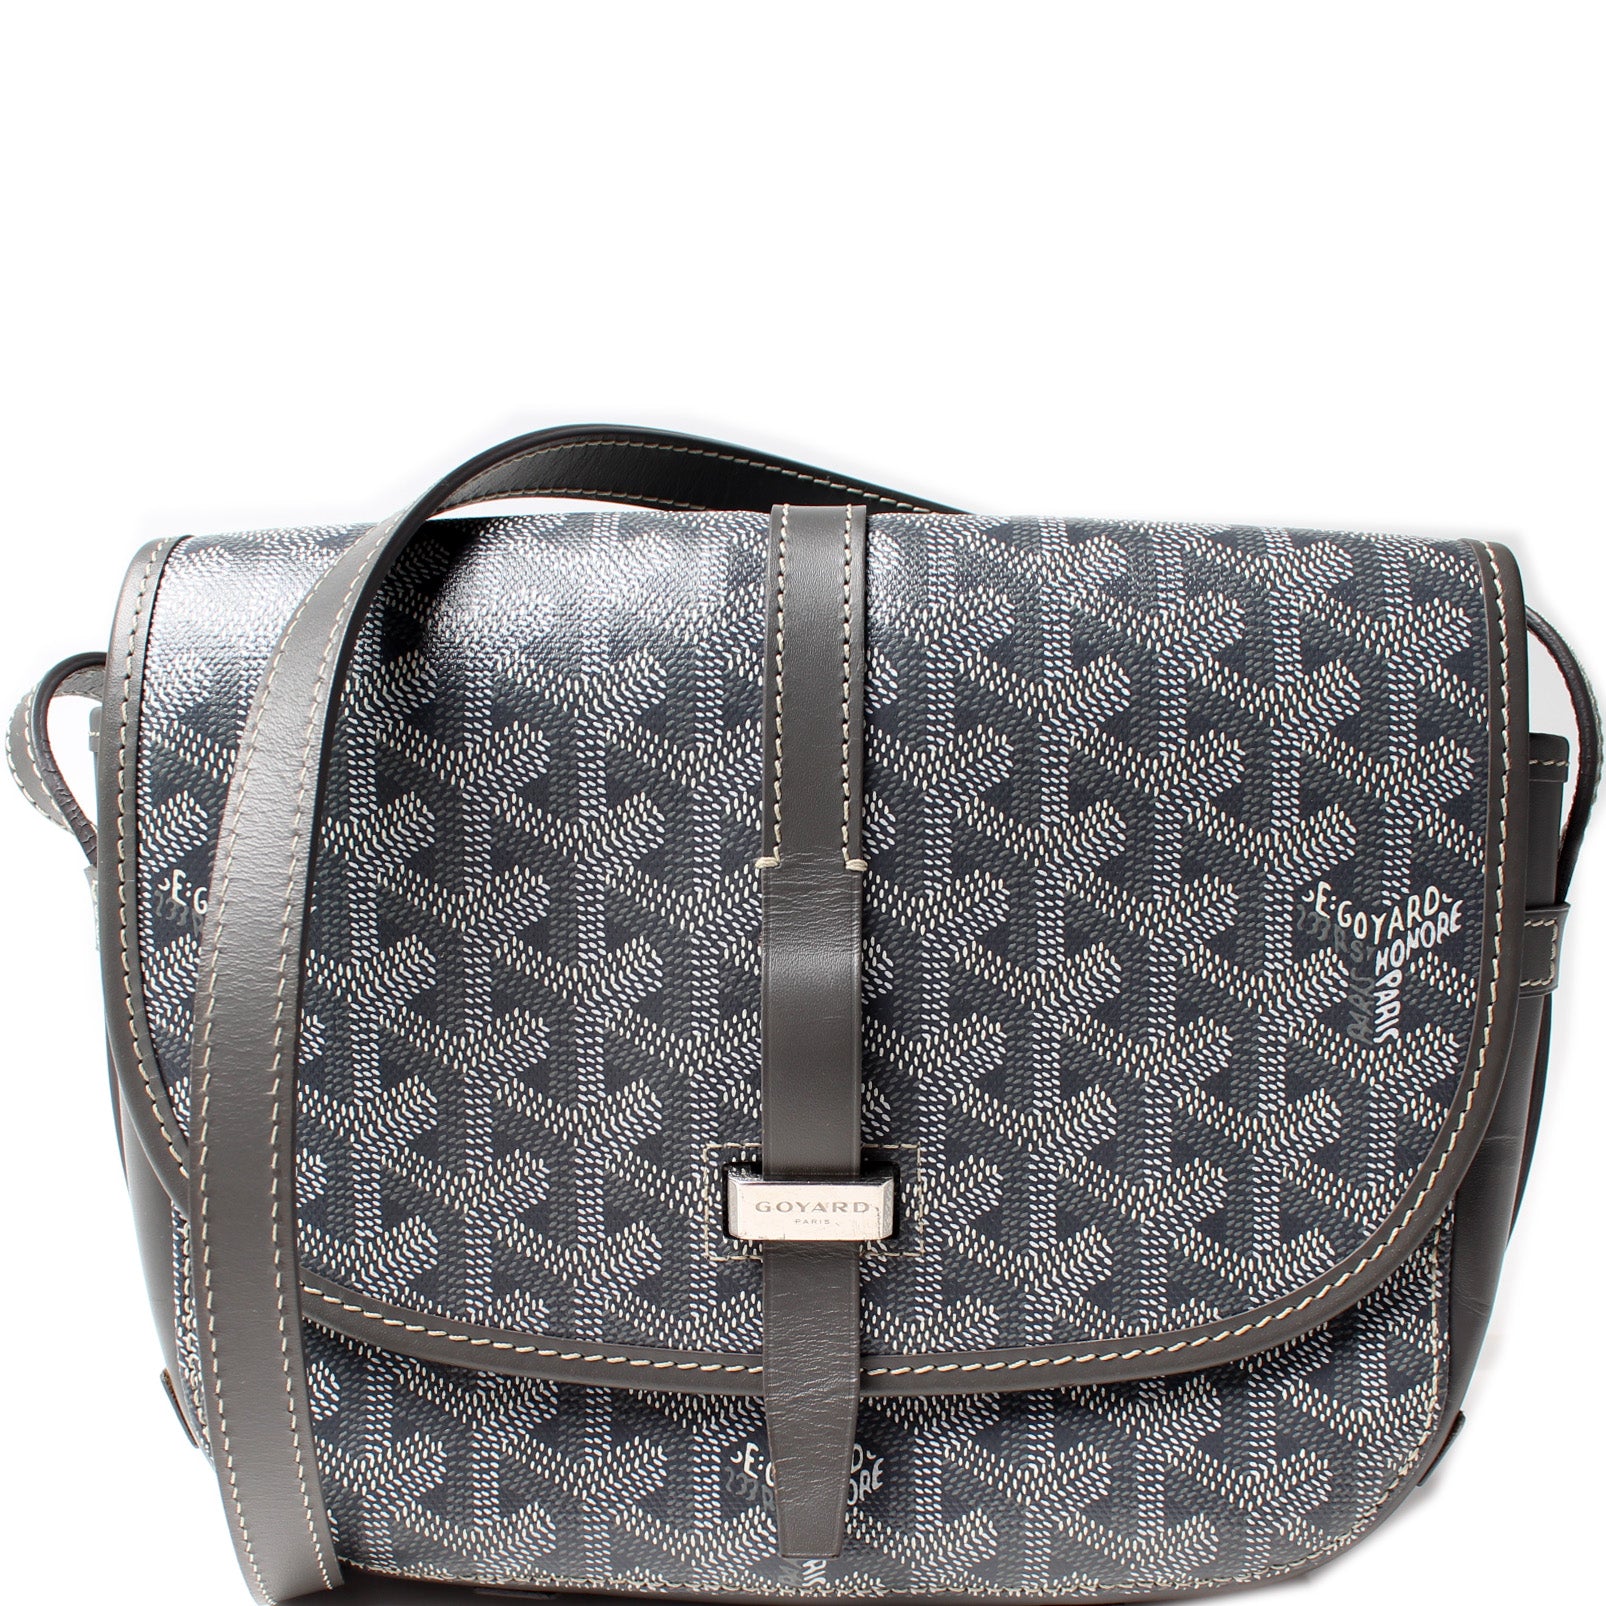 The Goyard Belvedere Crossbody Bag PM Grey Goyard 's Newest Version is Now  Available at an Amazing Price